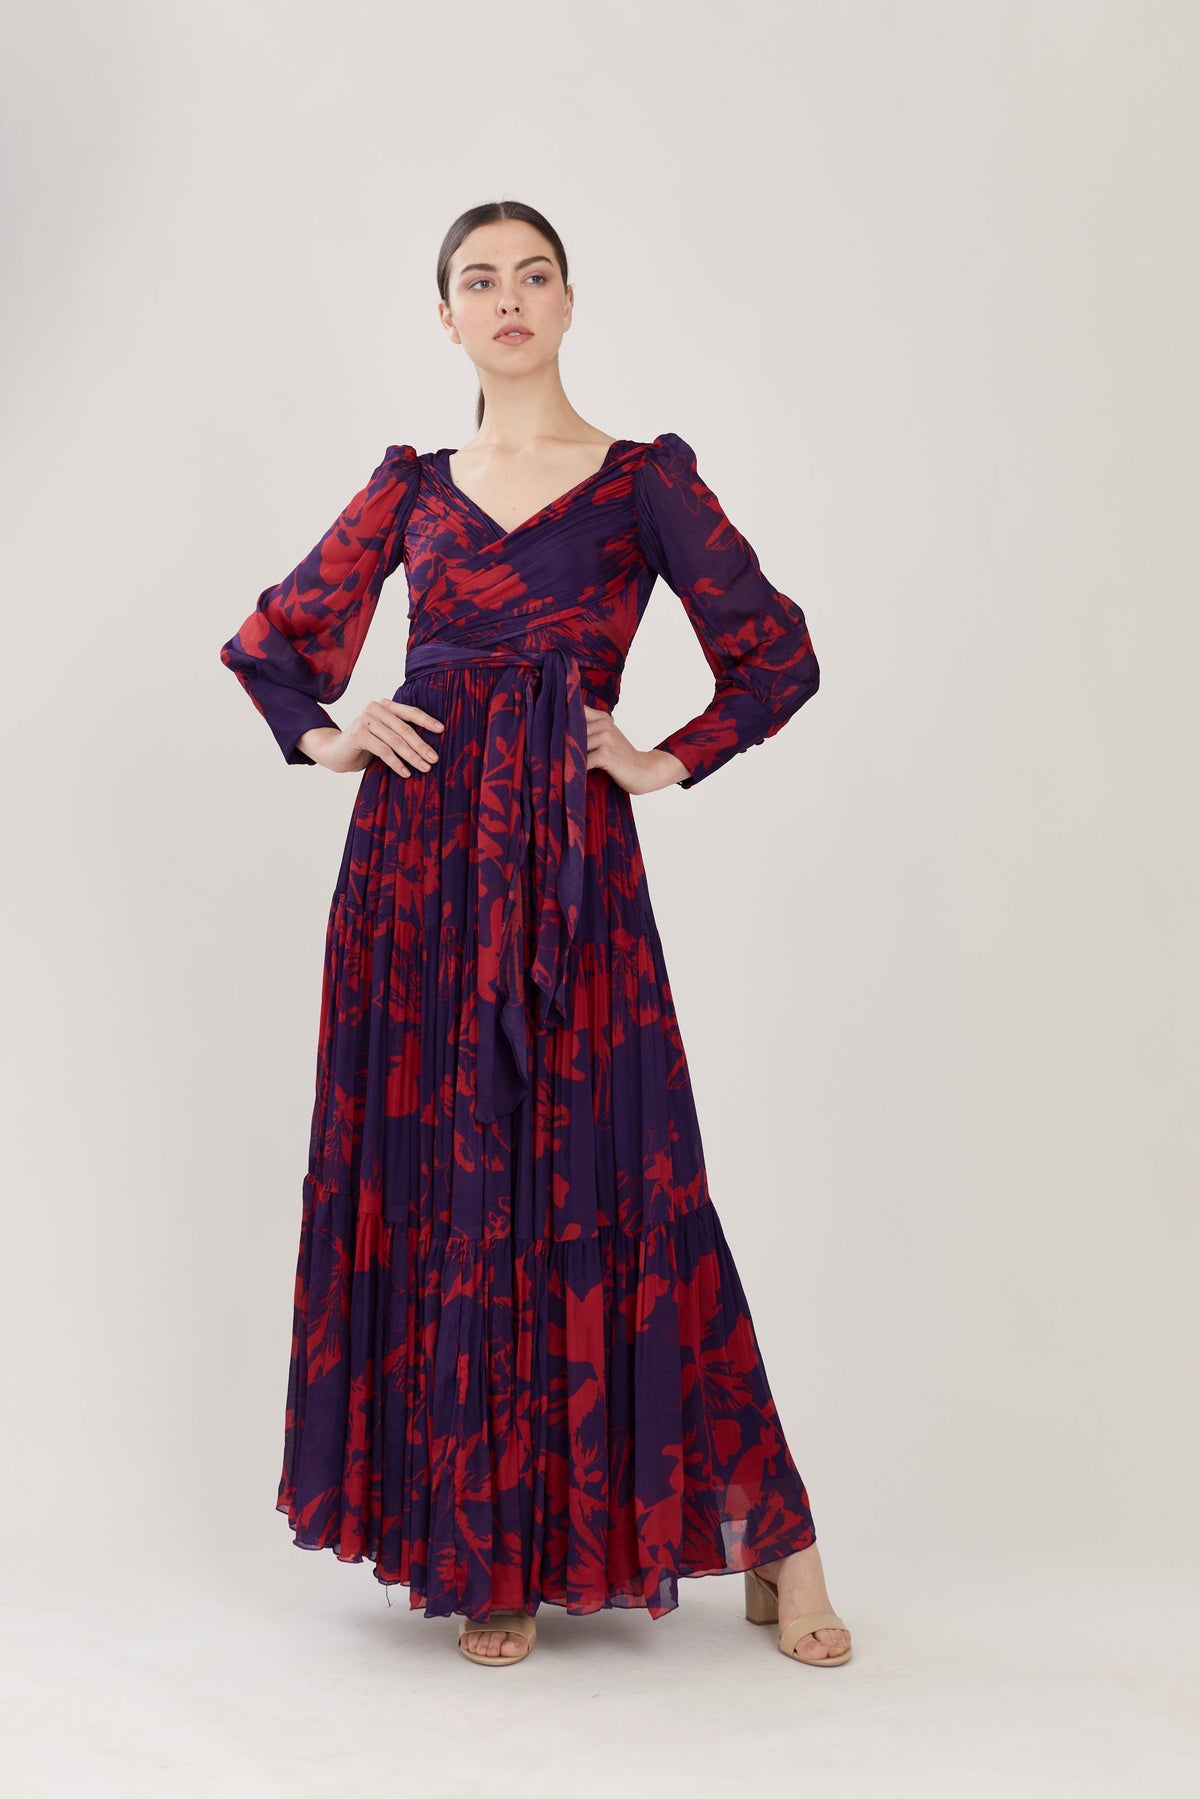 PURPLE AND RED FLORAL LONG WRAP DRESS